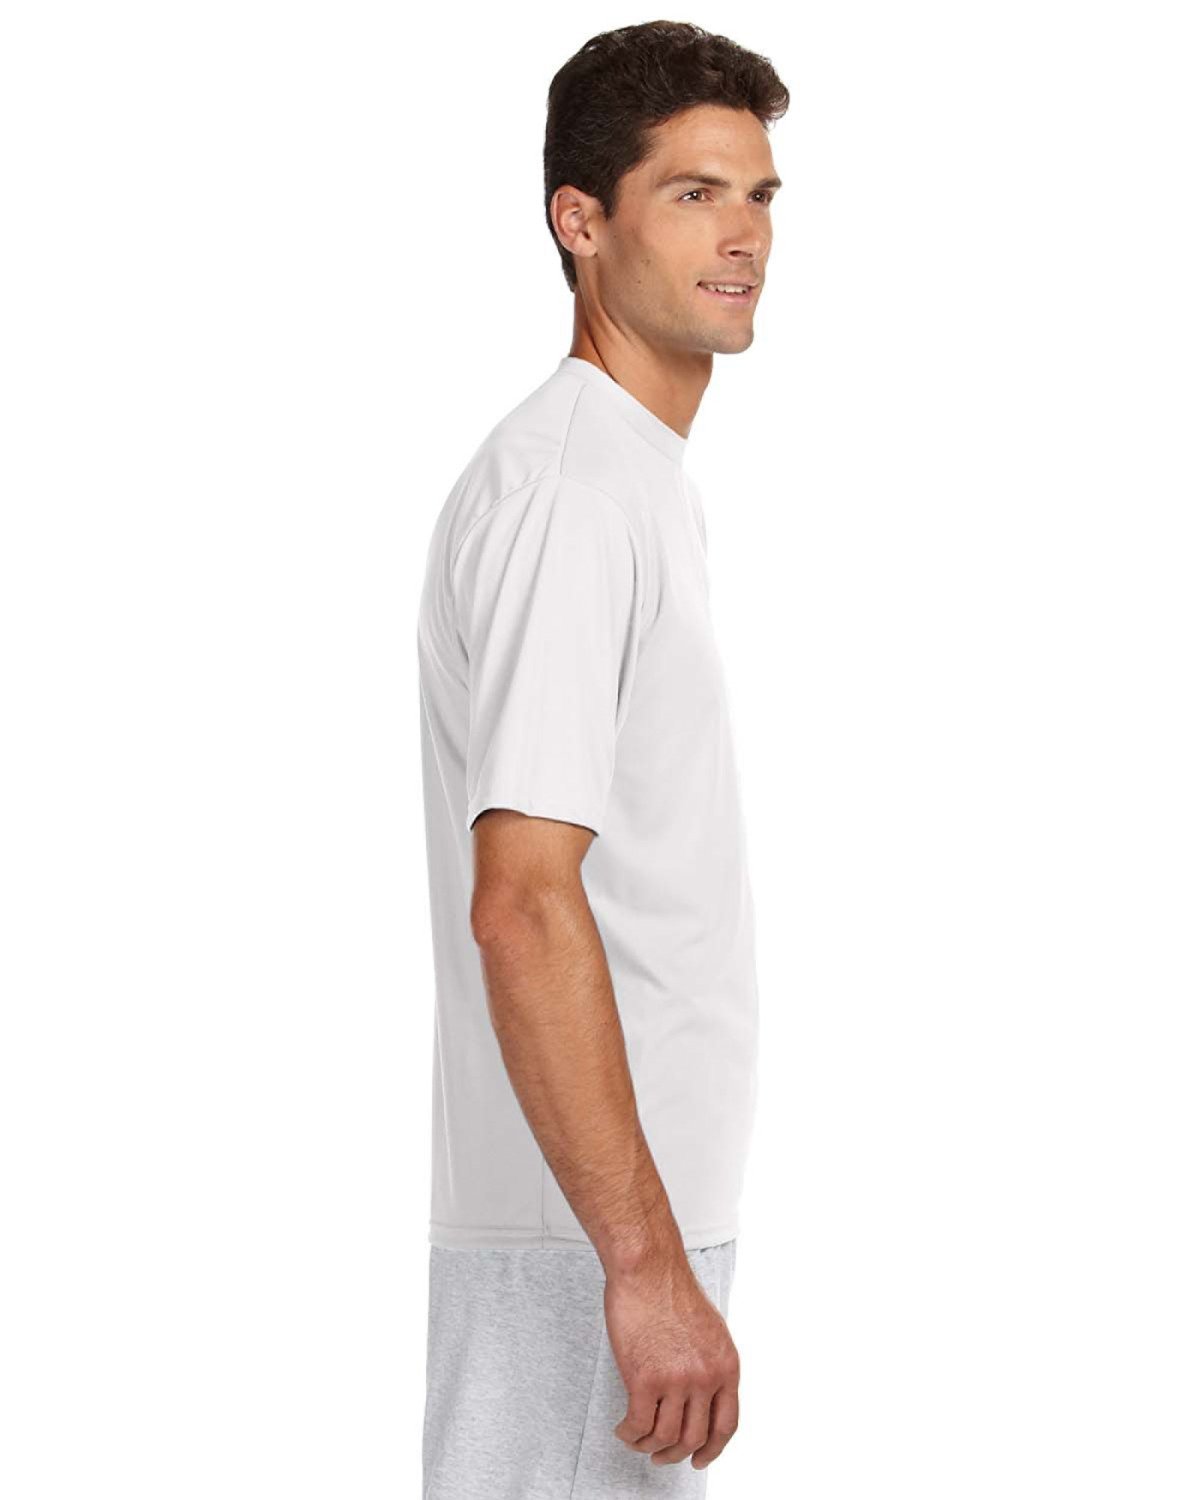 White t-shirt, side view.